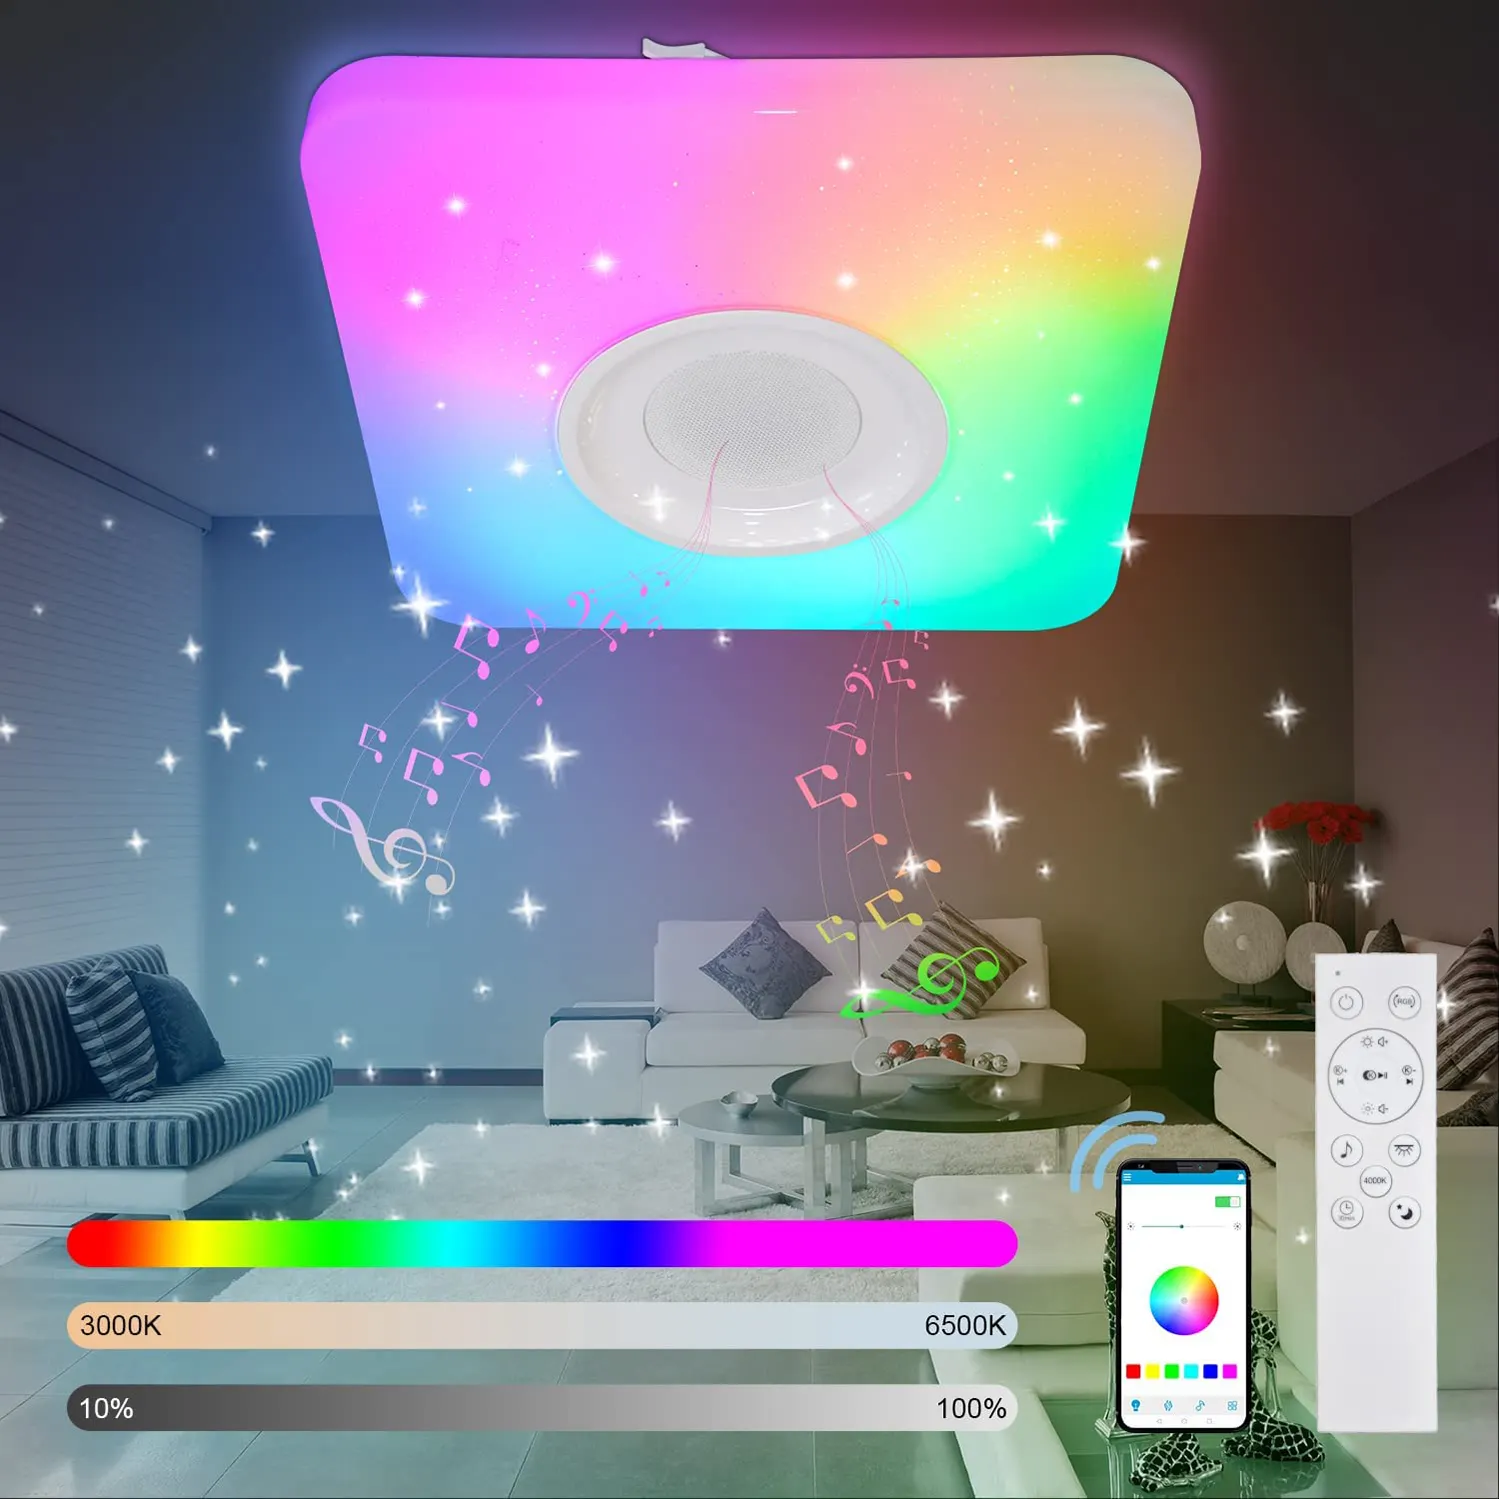 Music Rgb Star Decorative Dimmable Luxury Square Modern Bedroom Home Flush Mount Bathroom Led Ceiling Light